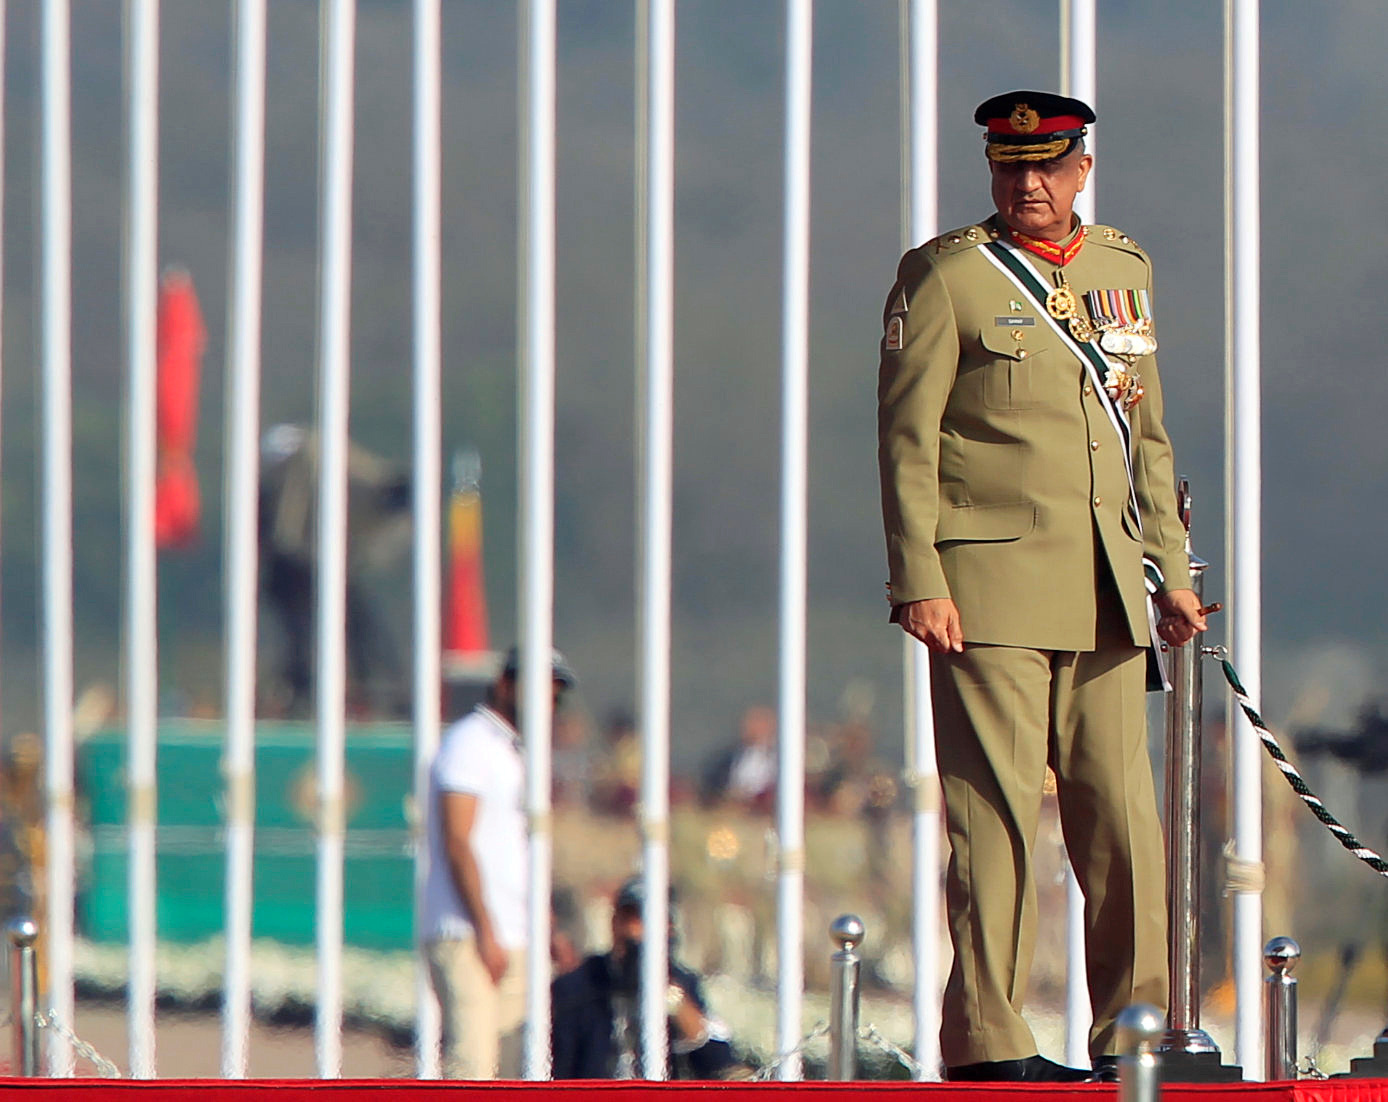 Pakistan's Army Chief of Staff General Qamar Javed Bajwa arrives to attend the Pakistan Day military parade in Islamabad